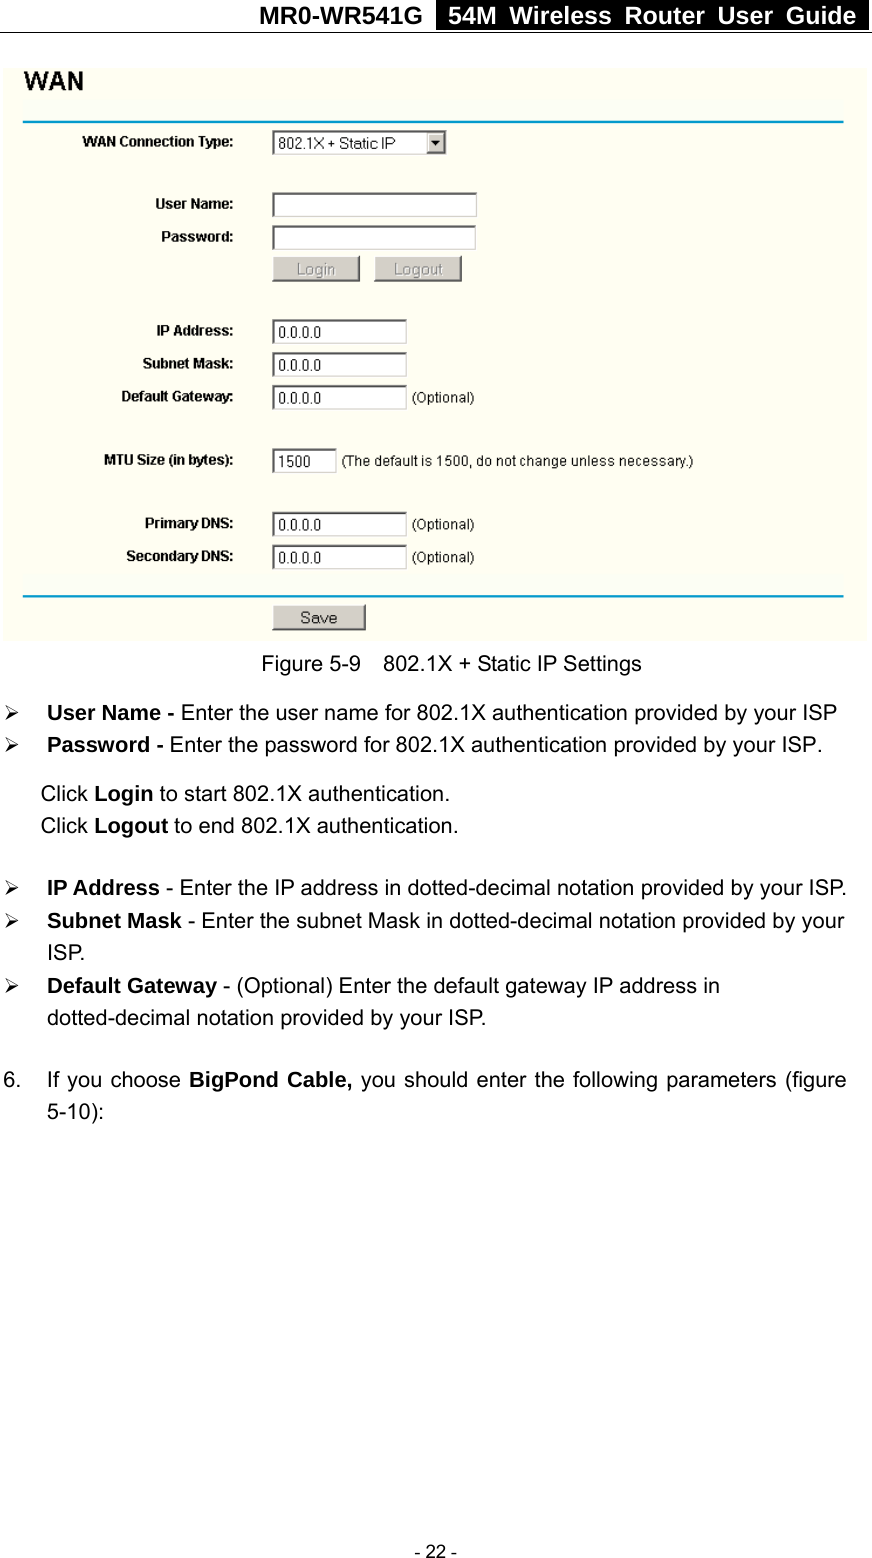 MR0-WR541G   54M Wireless Router User Guide   Figure 5-9    802.1X + Static IP Settings ¾ User Name - Enter the user name for 802.1X authentication provided by your ISP ¾ Password - Enter the password for 802.1X authentication provided by your ISP. Click Login to start 802.1X authentication. Click Logout to end 802.1X authentication. ¾ IP Address - Enter the IP address in dotted-decimal notation provided by your ISP. ¾ Subnet Mask - Enter the subnet Mask in dotted-decimal notation provided by your ISP. ¾ Default Gateway - (Optional) Enter the default gateway IP address in dotted-decimal notation provided by your ISP. 6.  If you choose BigPond Cable, you should enter the following parameters (figure 5-10):    - 22 - 